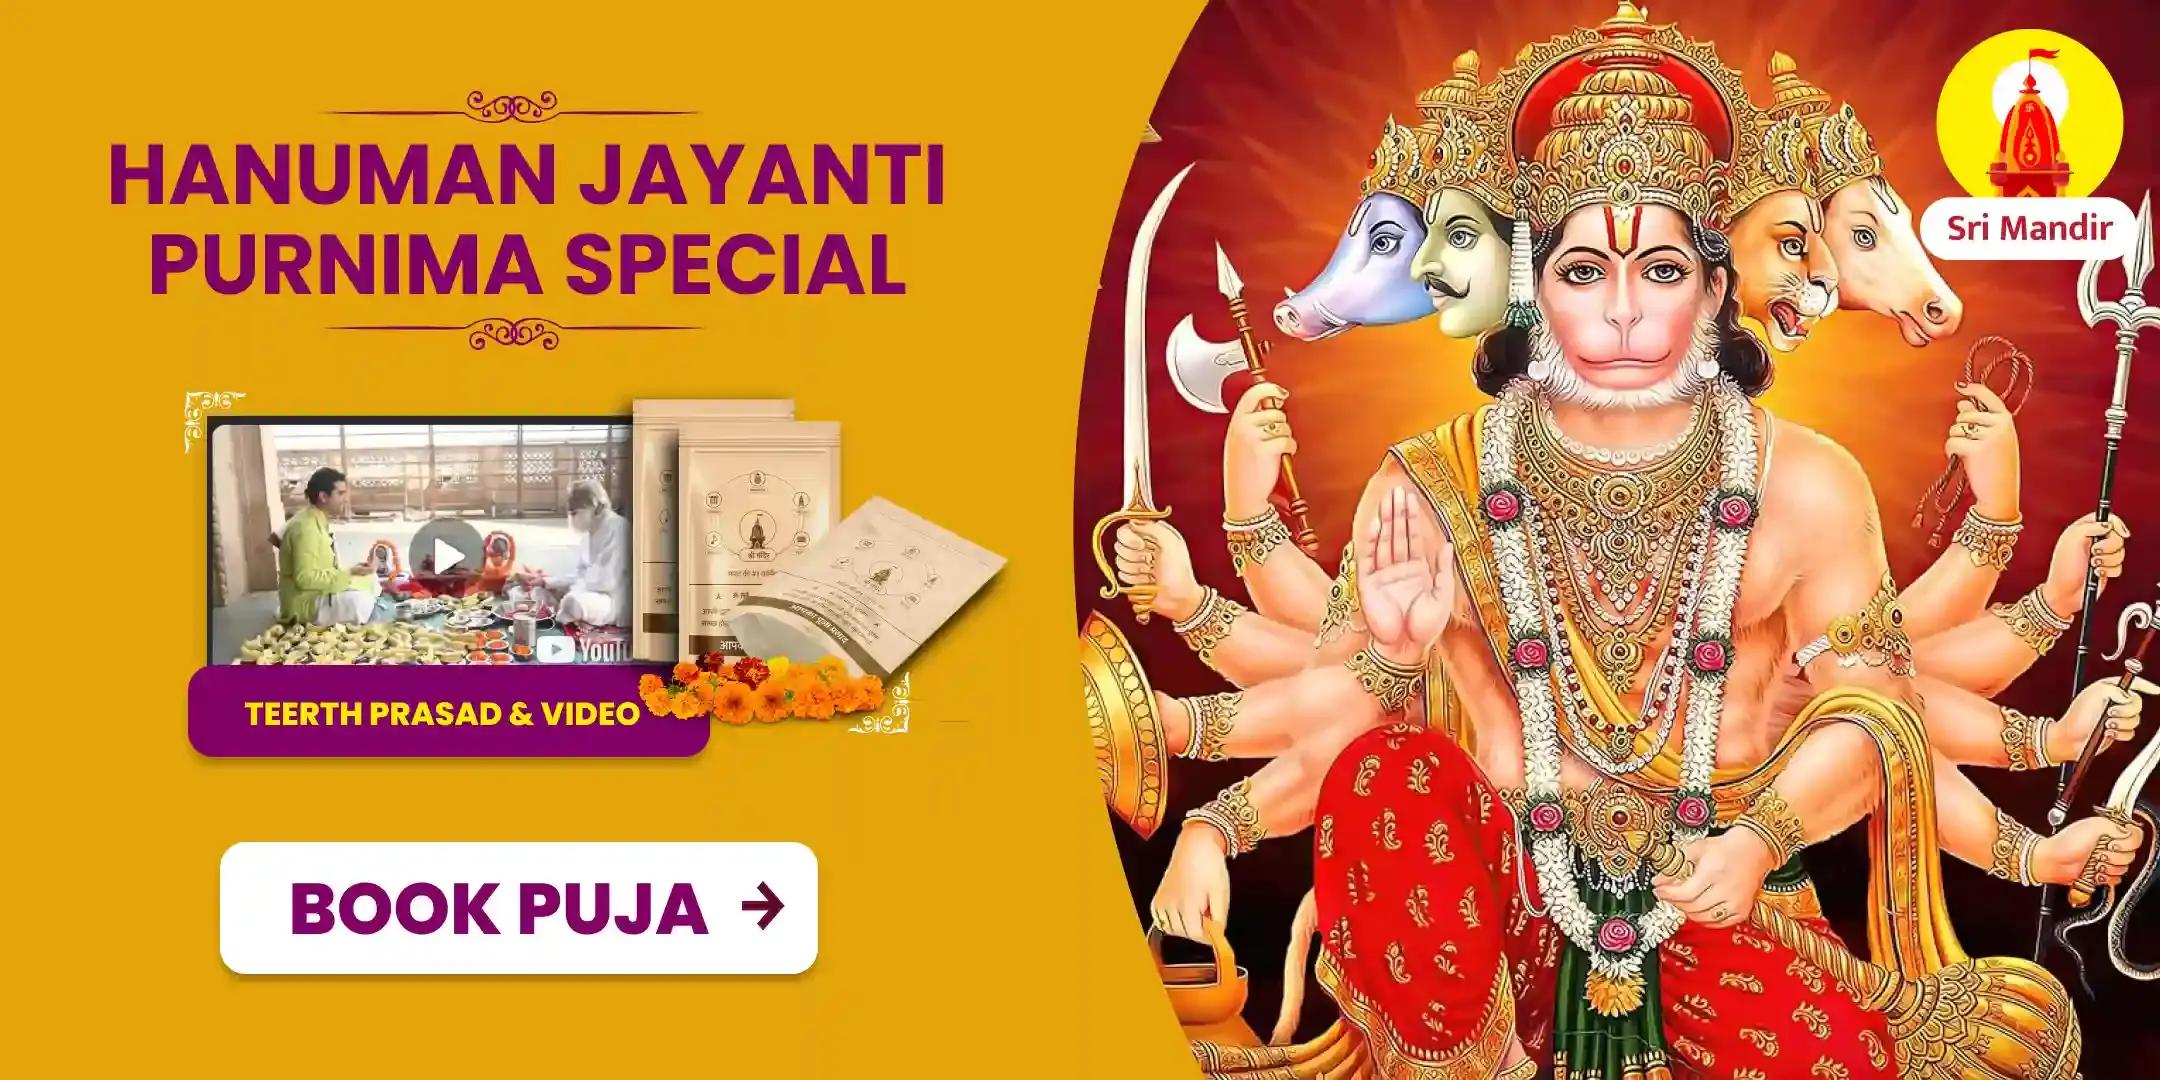 Jayanti Purnima Special Hanuman Vadvanal Stotra Path and Sindoor Abhishek for Fear, Anxiety and Supernatural Forces 